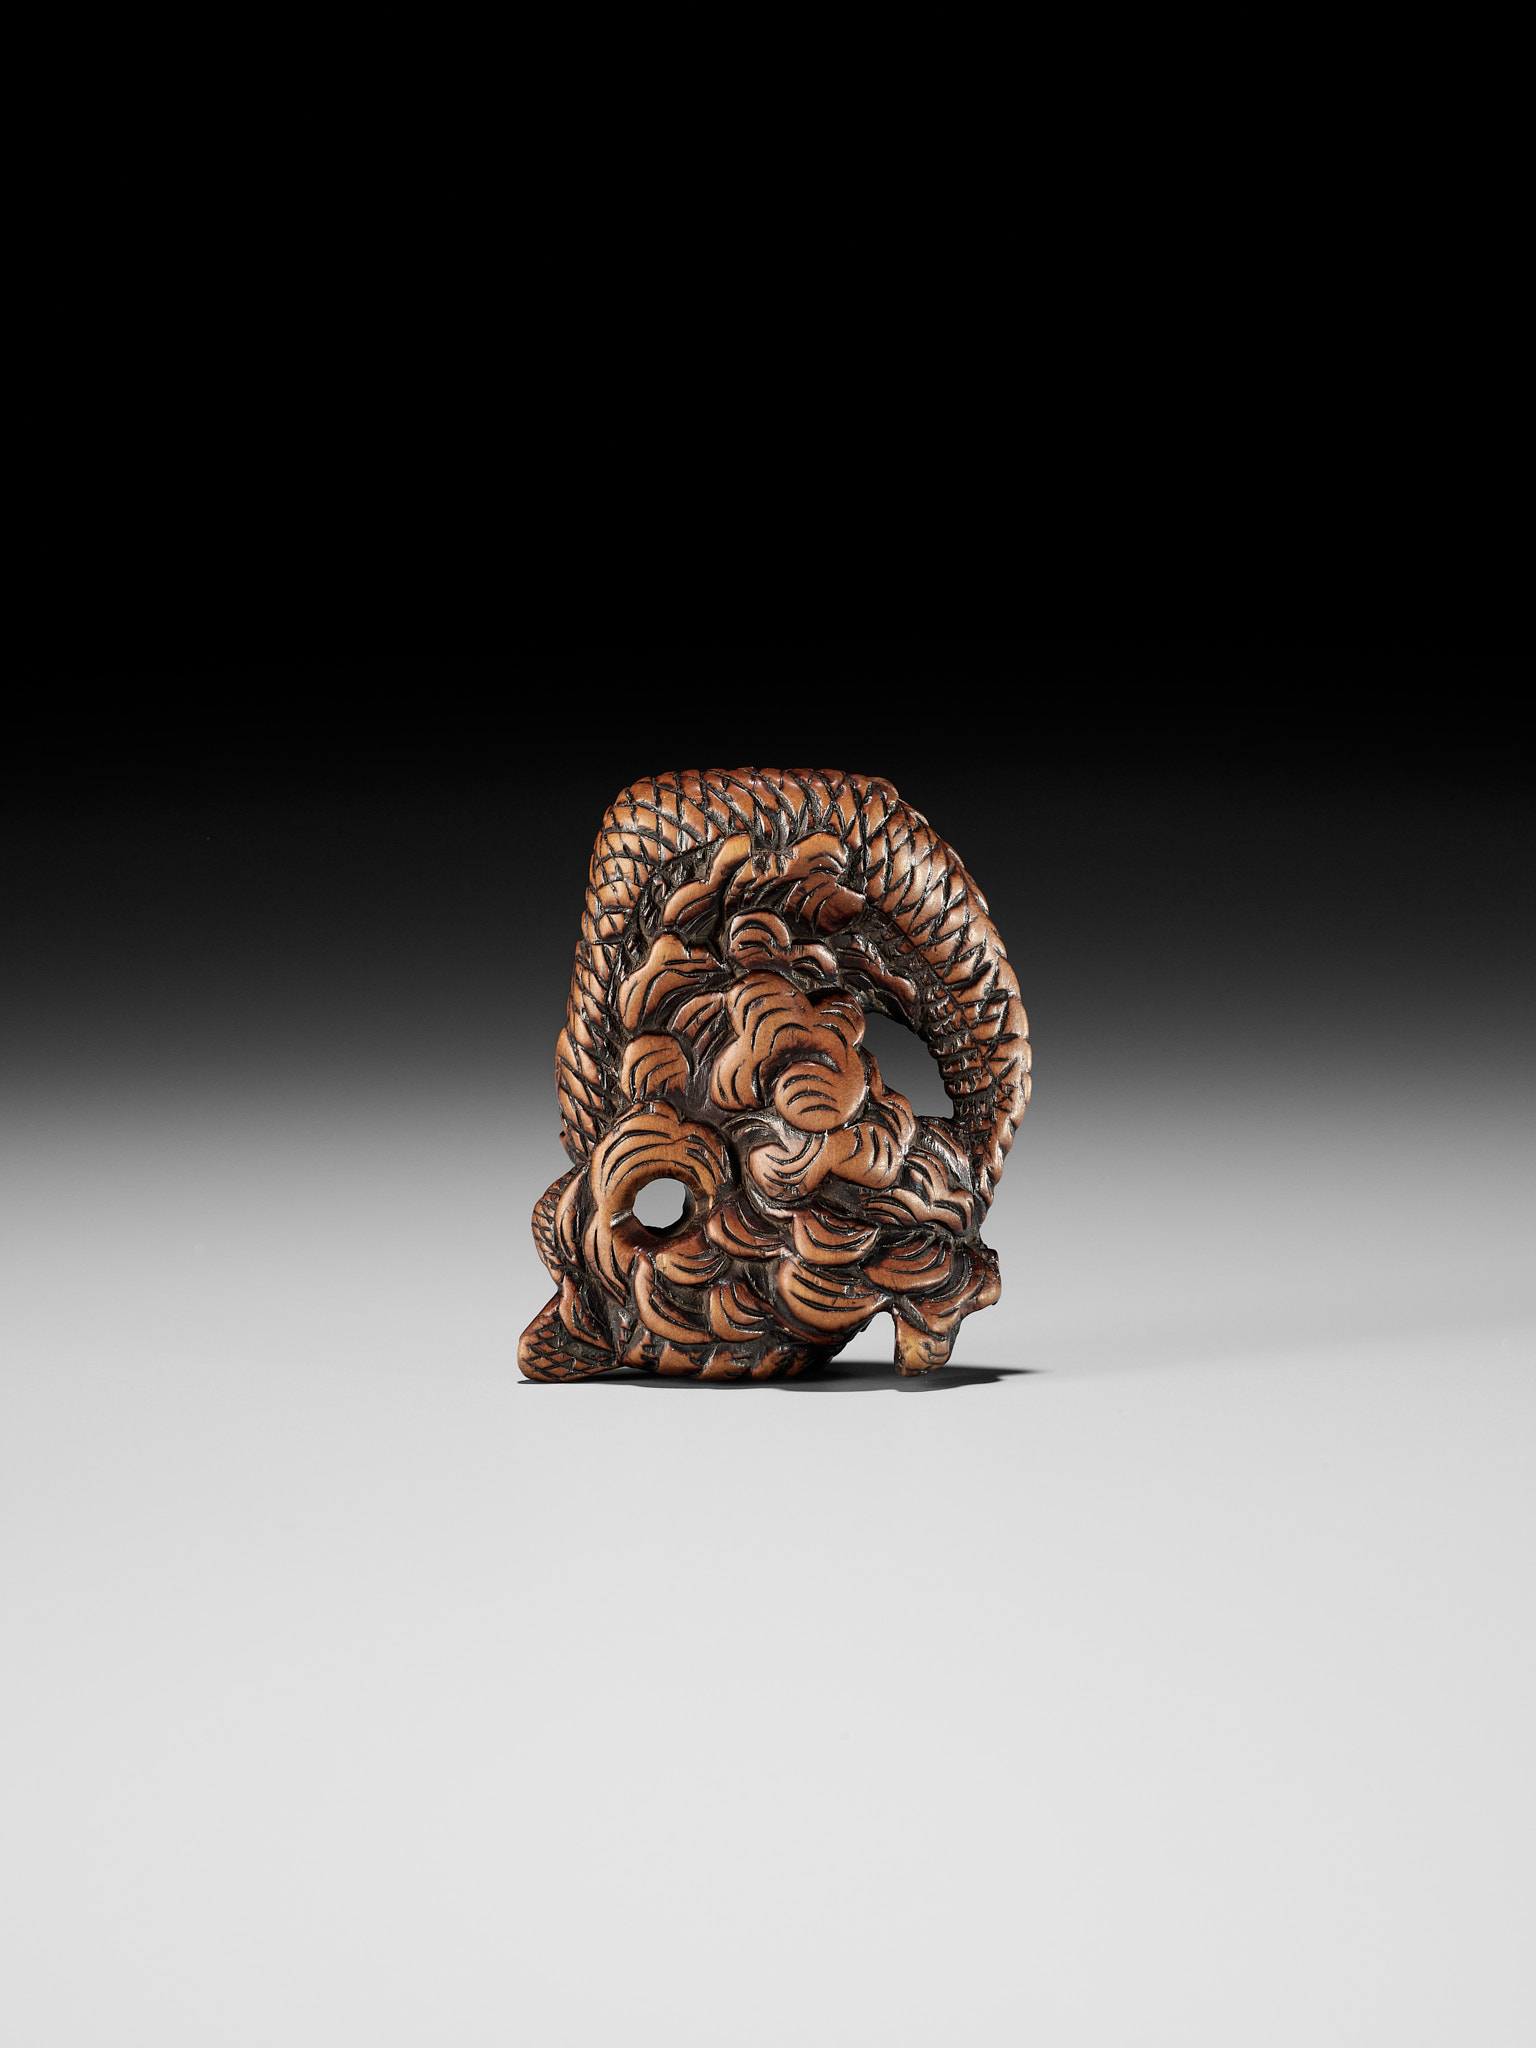 A POWERFUL WOOD NETSUKE OF A COILED DRAGON - Image 2 of 8